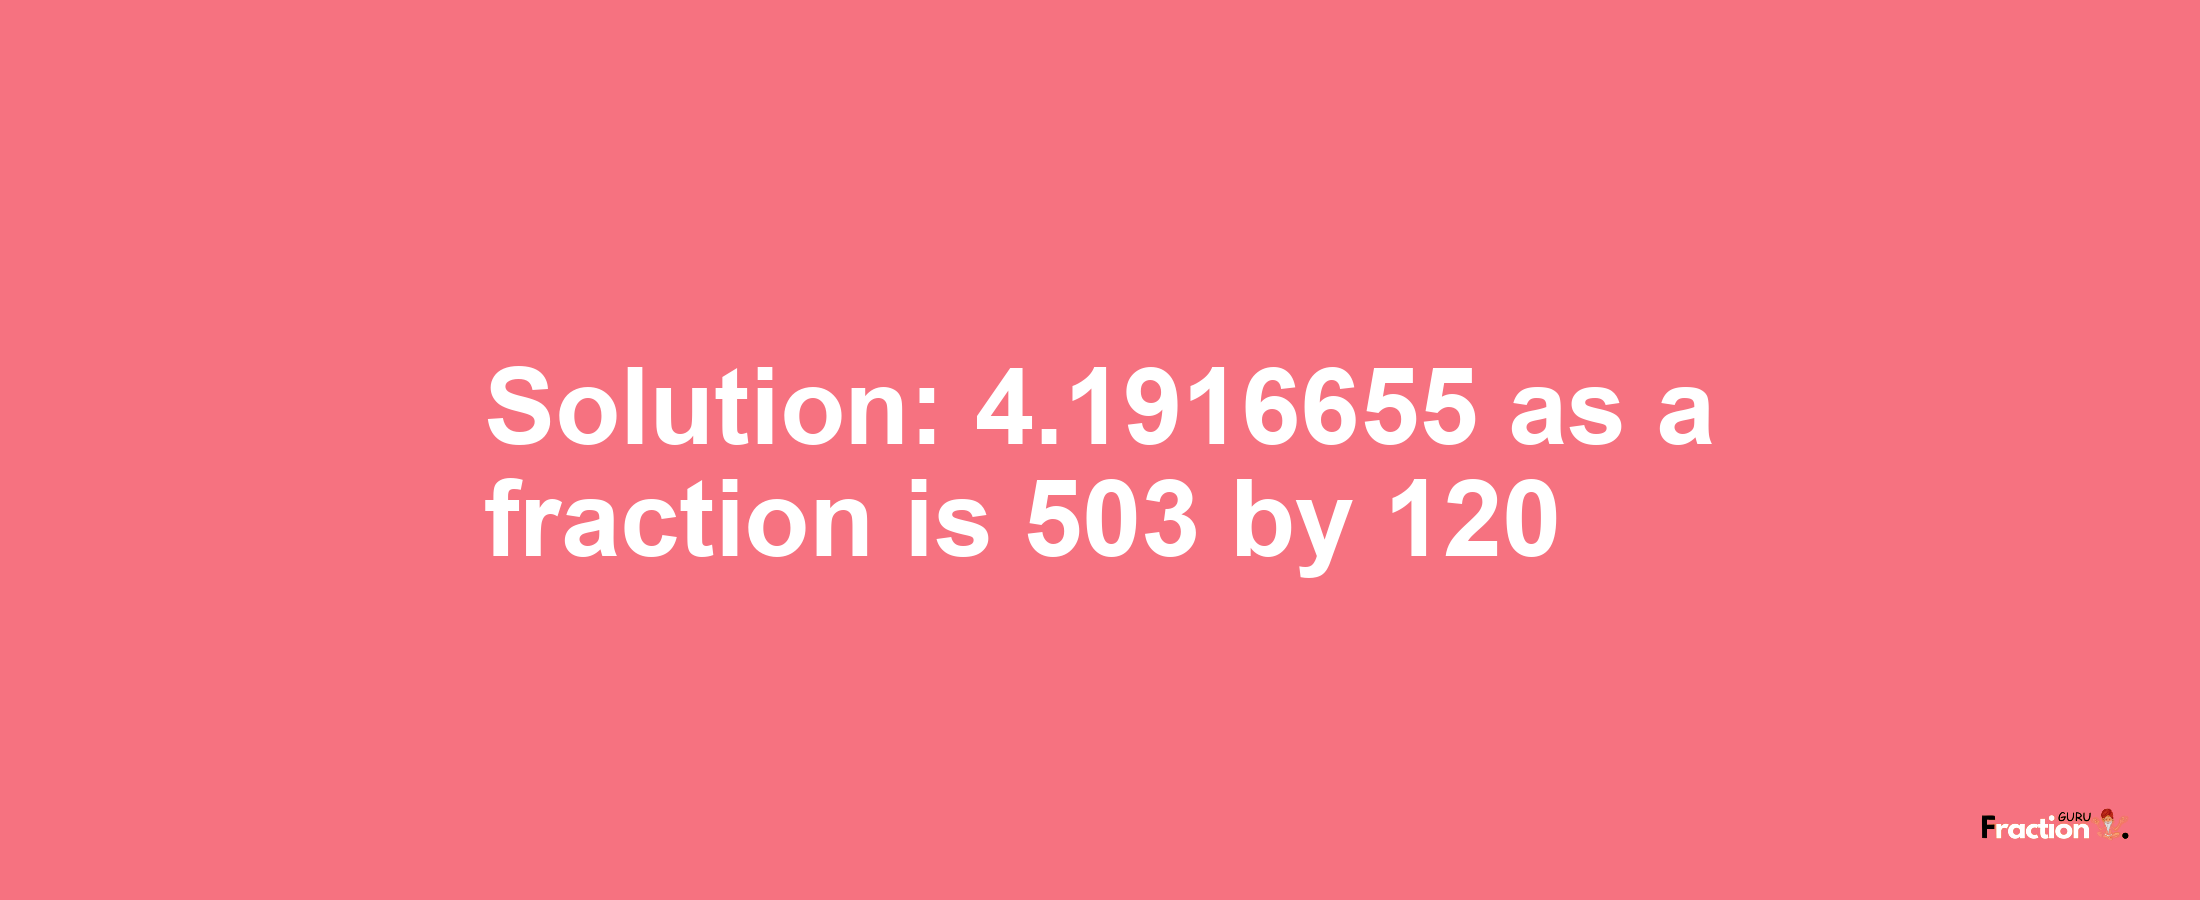 Solution:4.1916655 as a fraction is 503/120